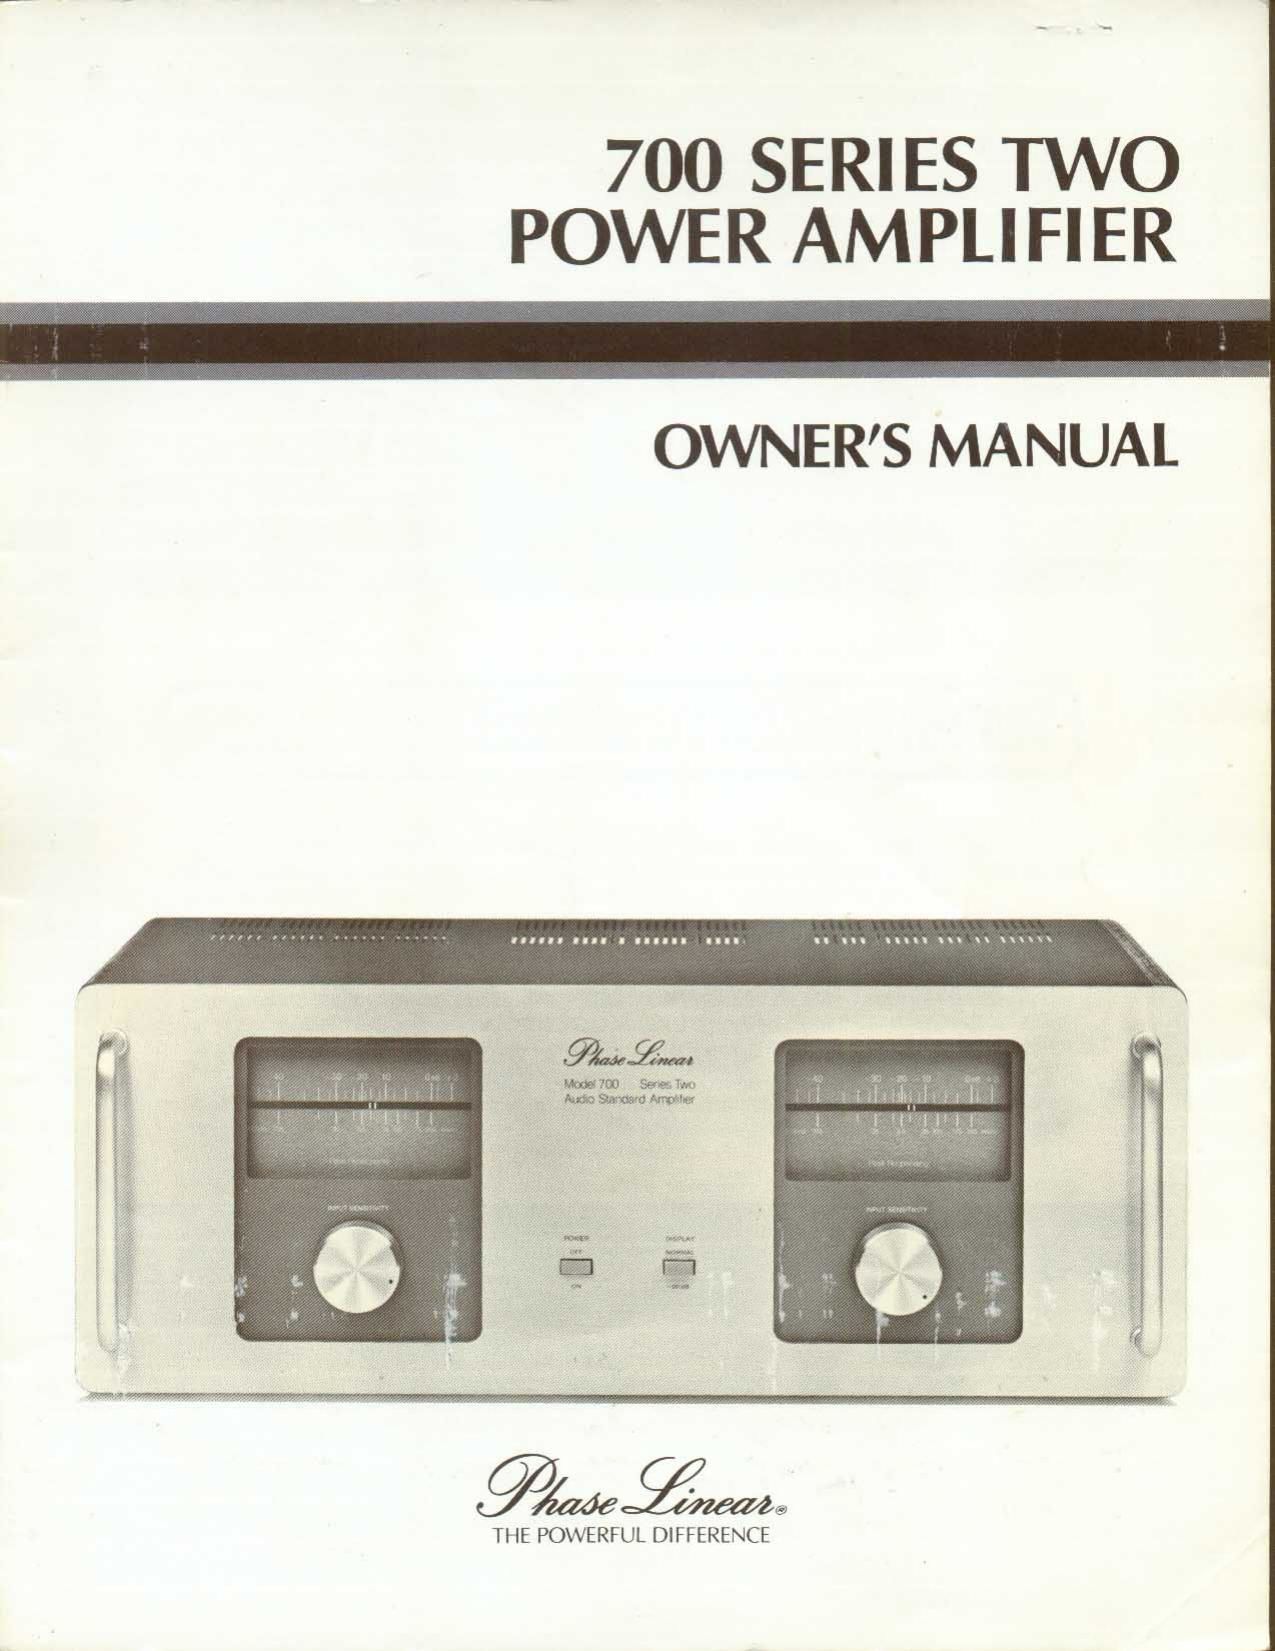 Phase Linear 700 Series Two Owners Manual